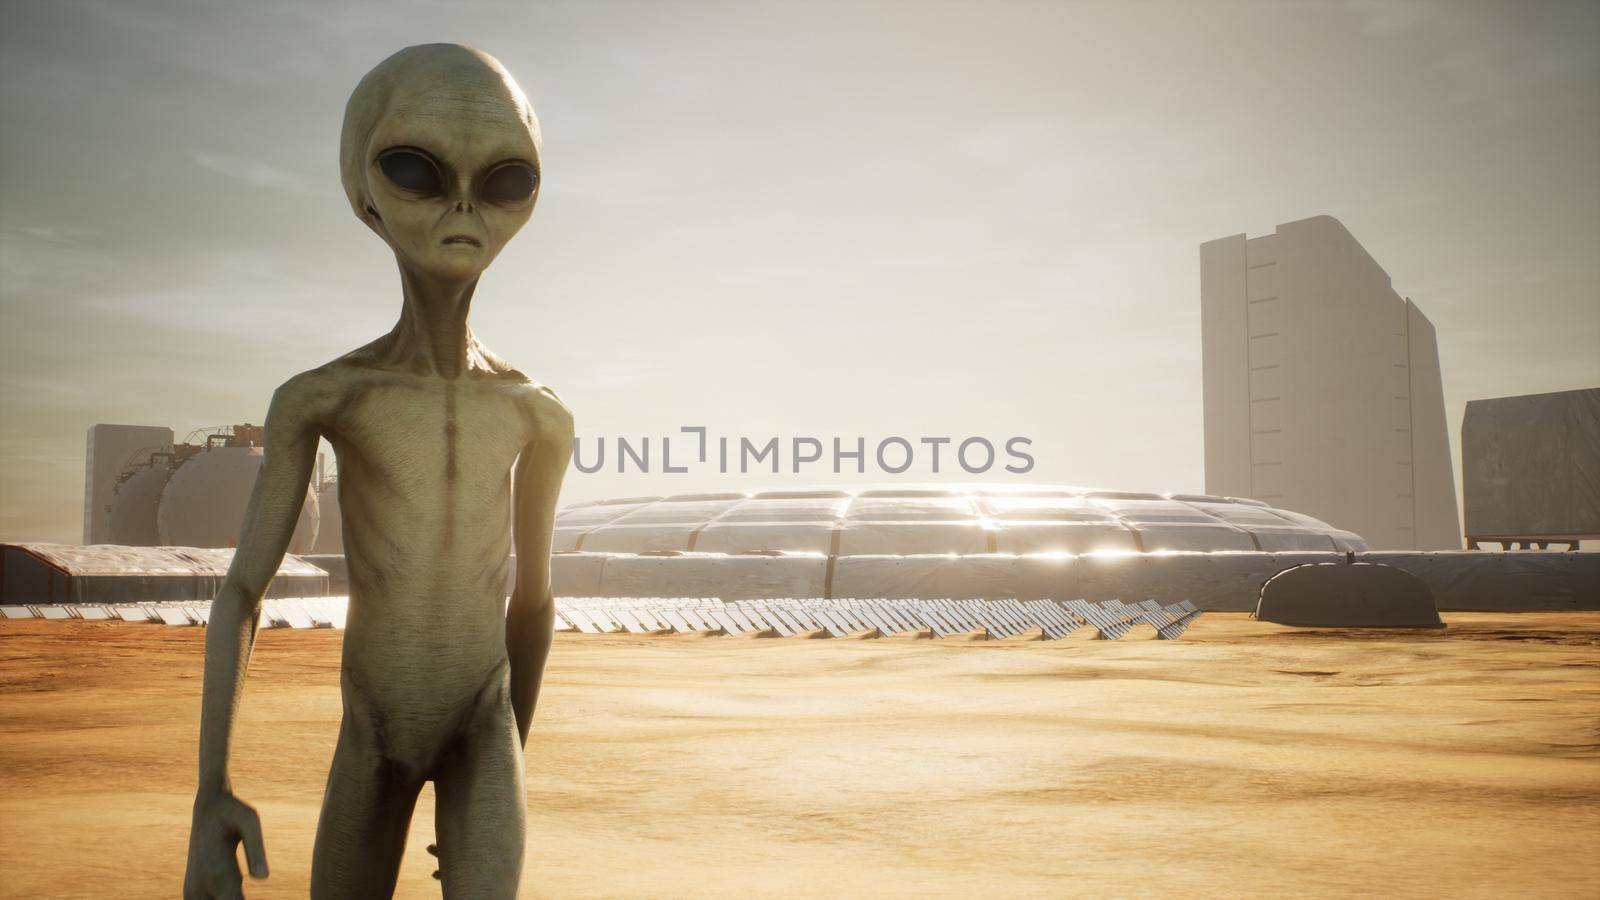 Alien returns to base after inspecting solar panels. Super realistic concept.